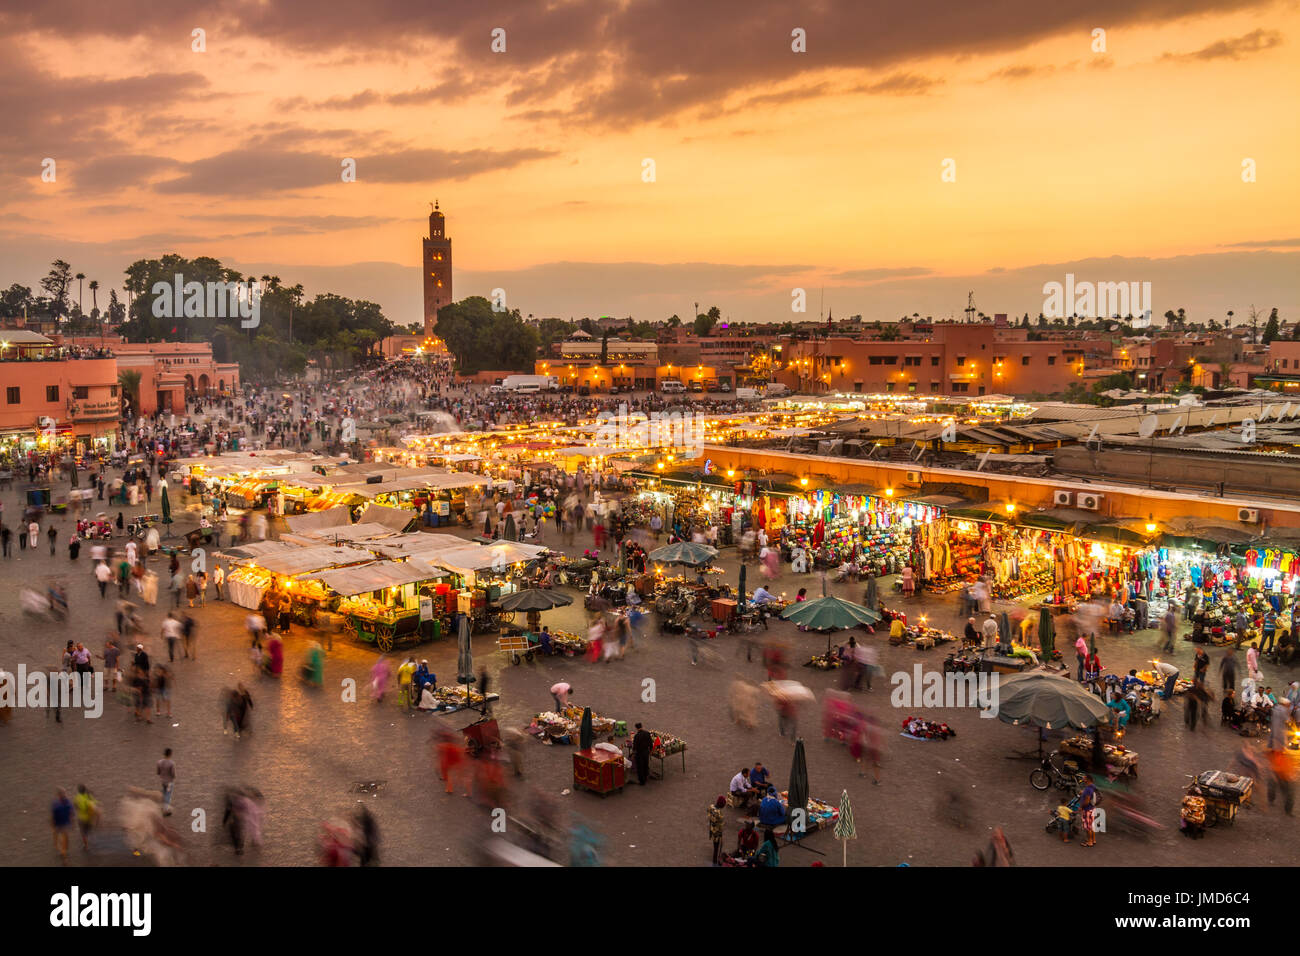 Jamaa el Fna market square in sunset, Marrakesh, Morocco, north Africa. Stock Photo